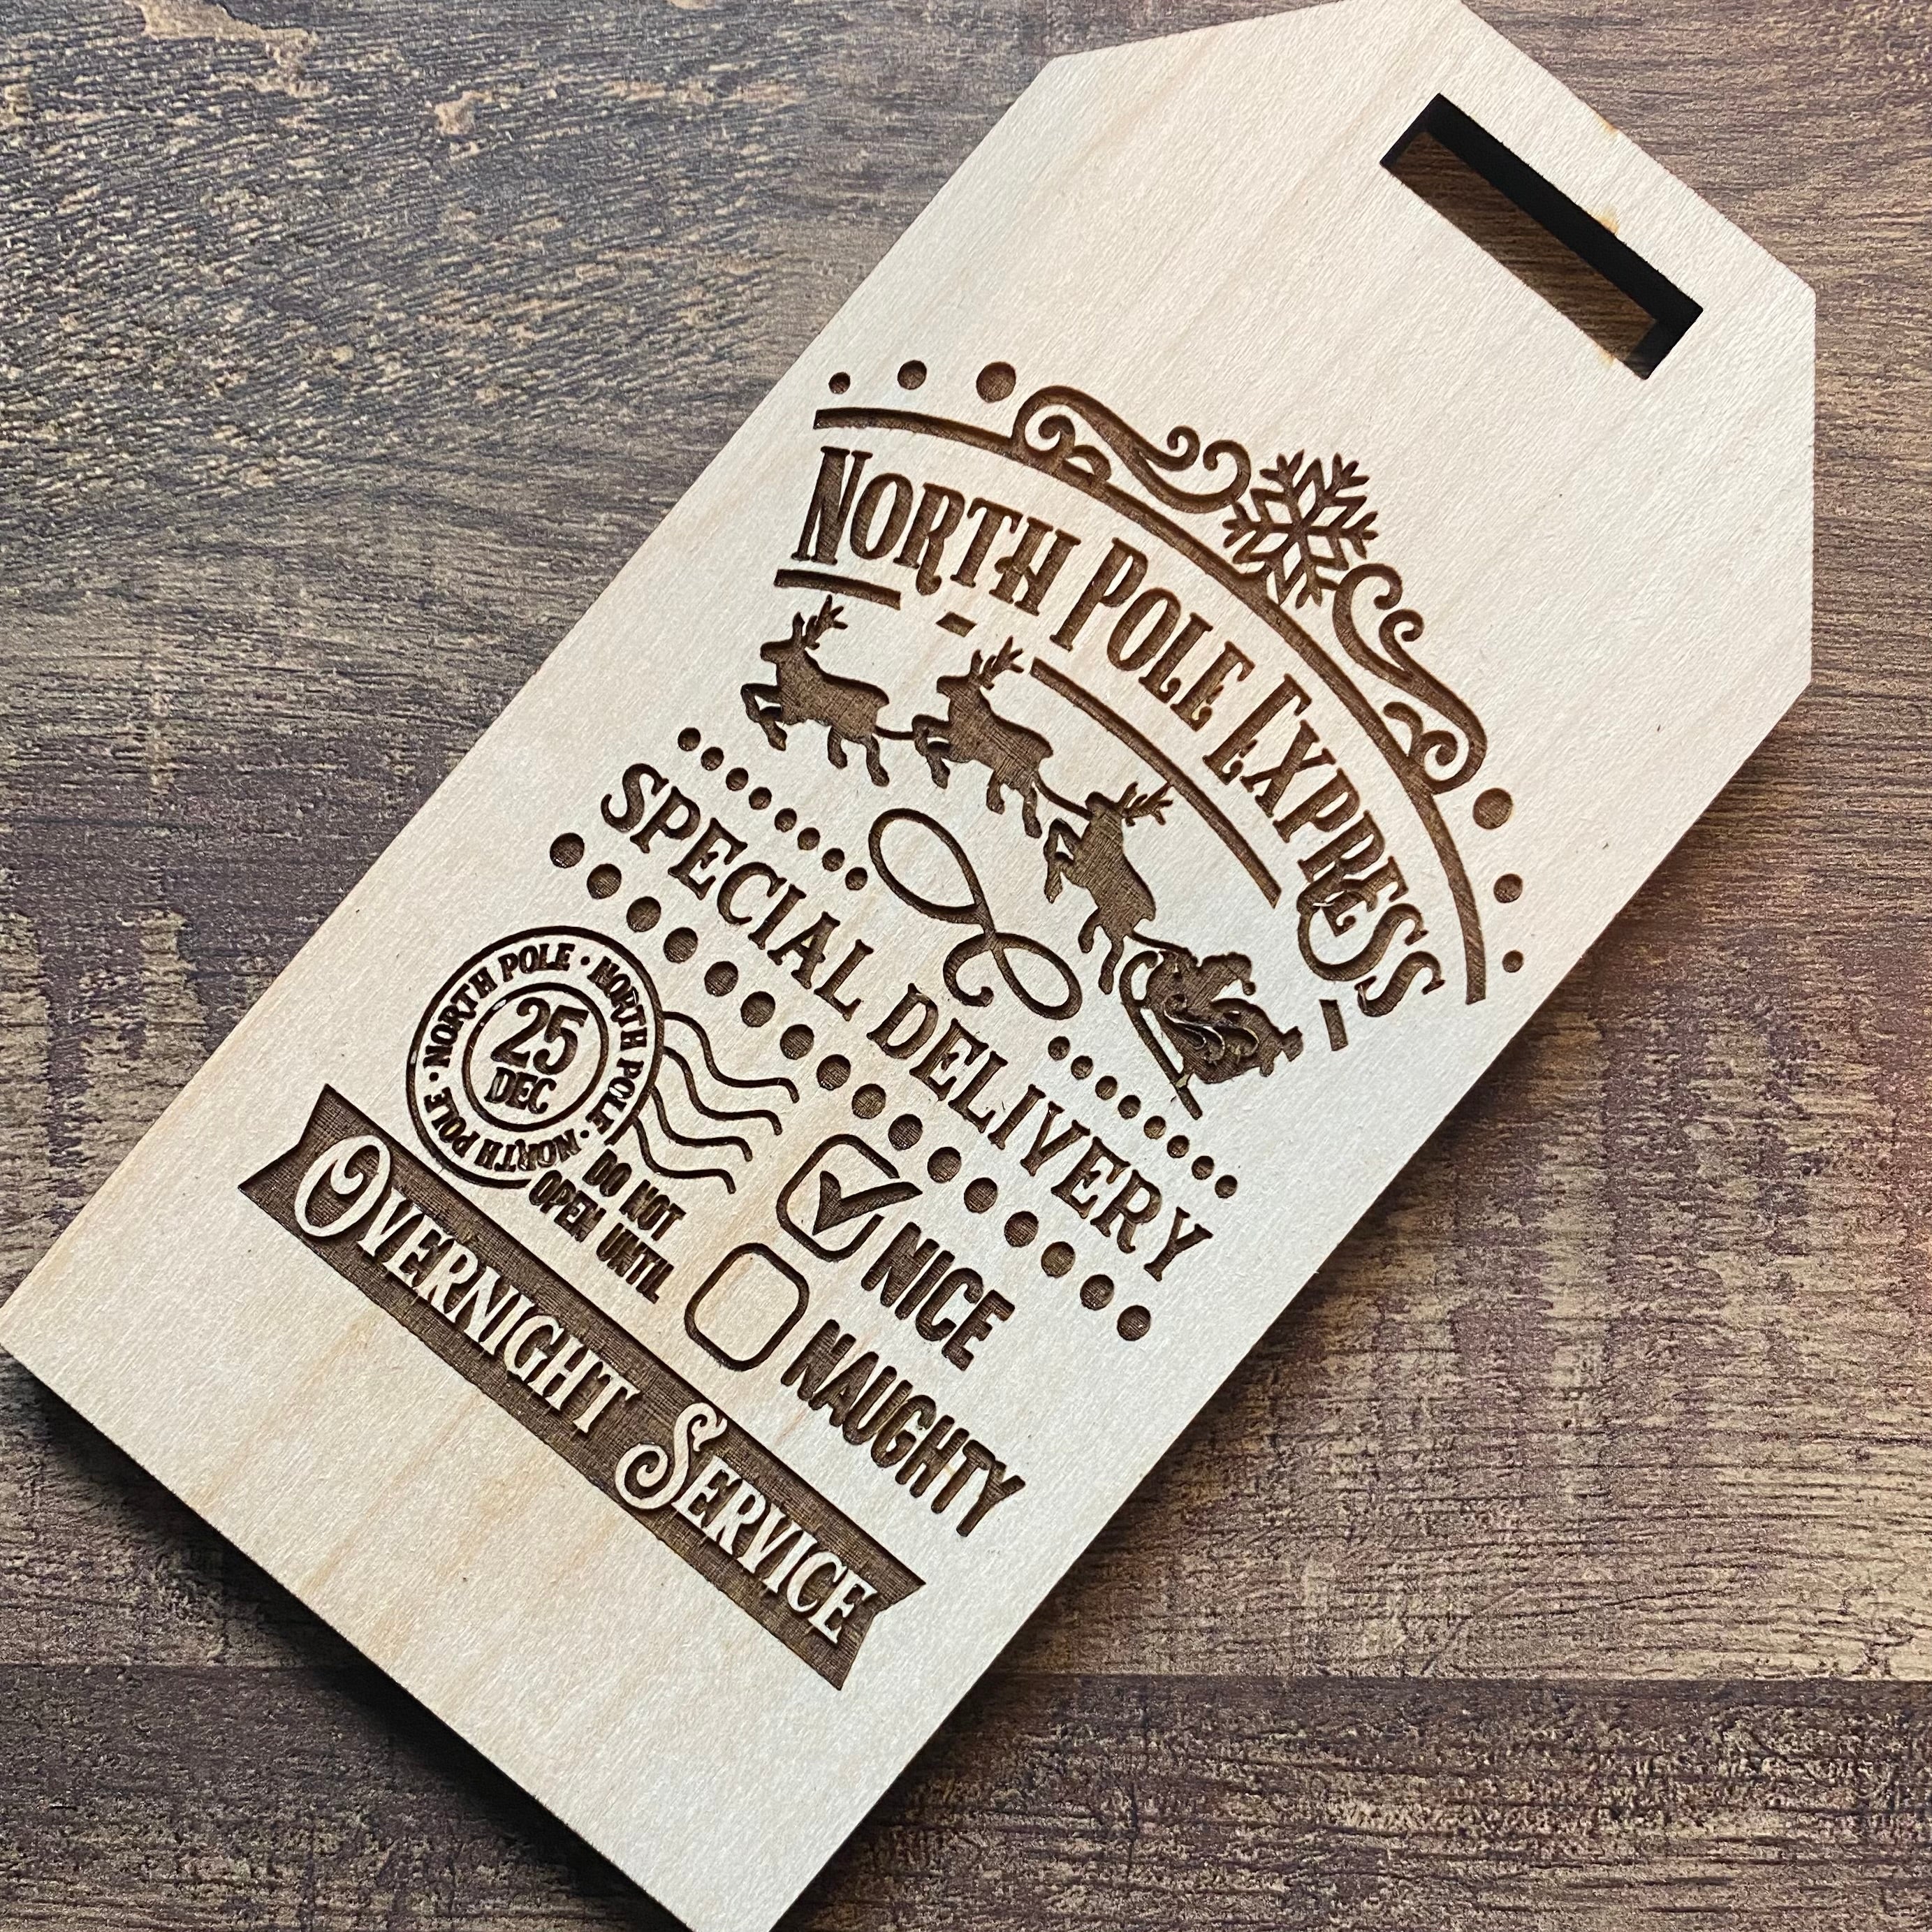 Engraved Christmas Wooden Gift Tags